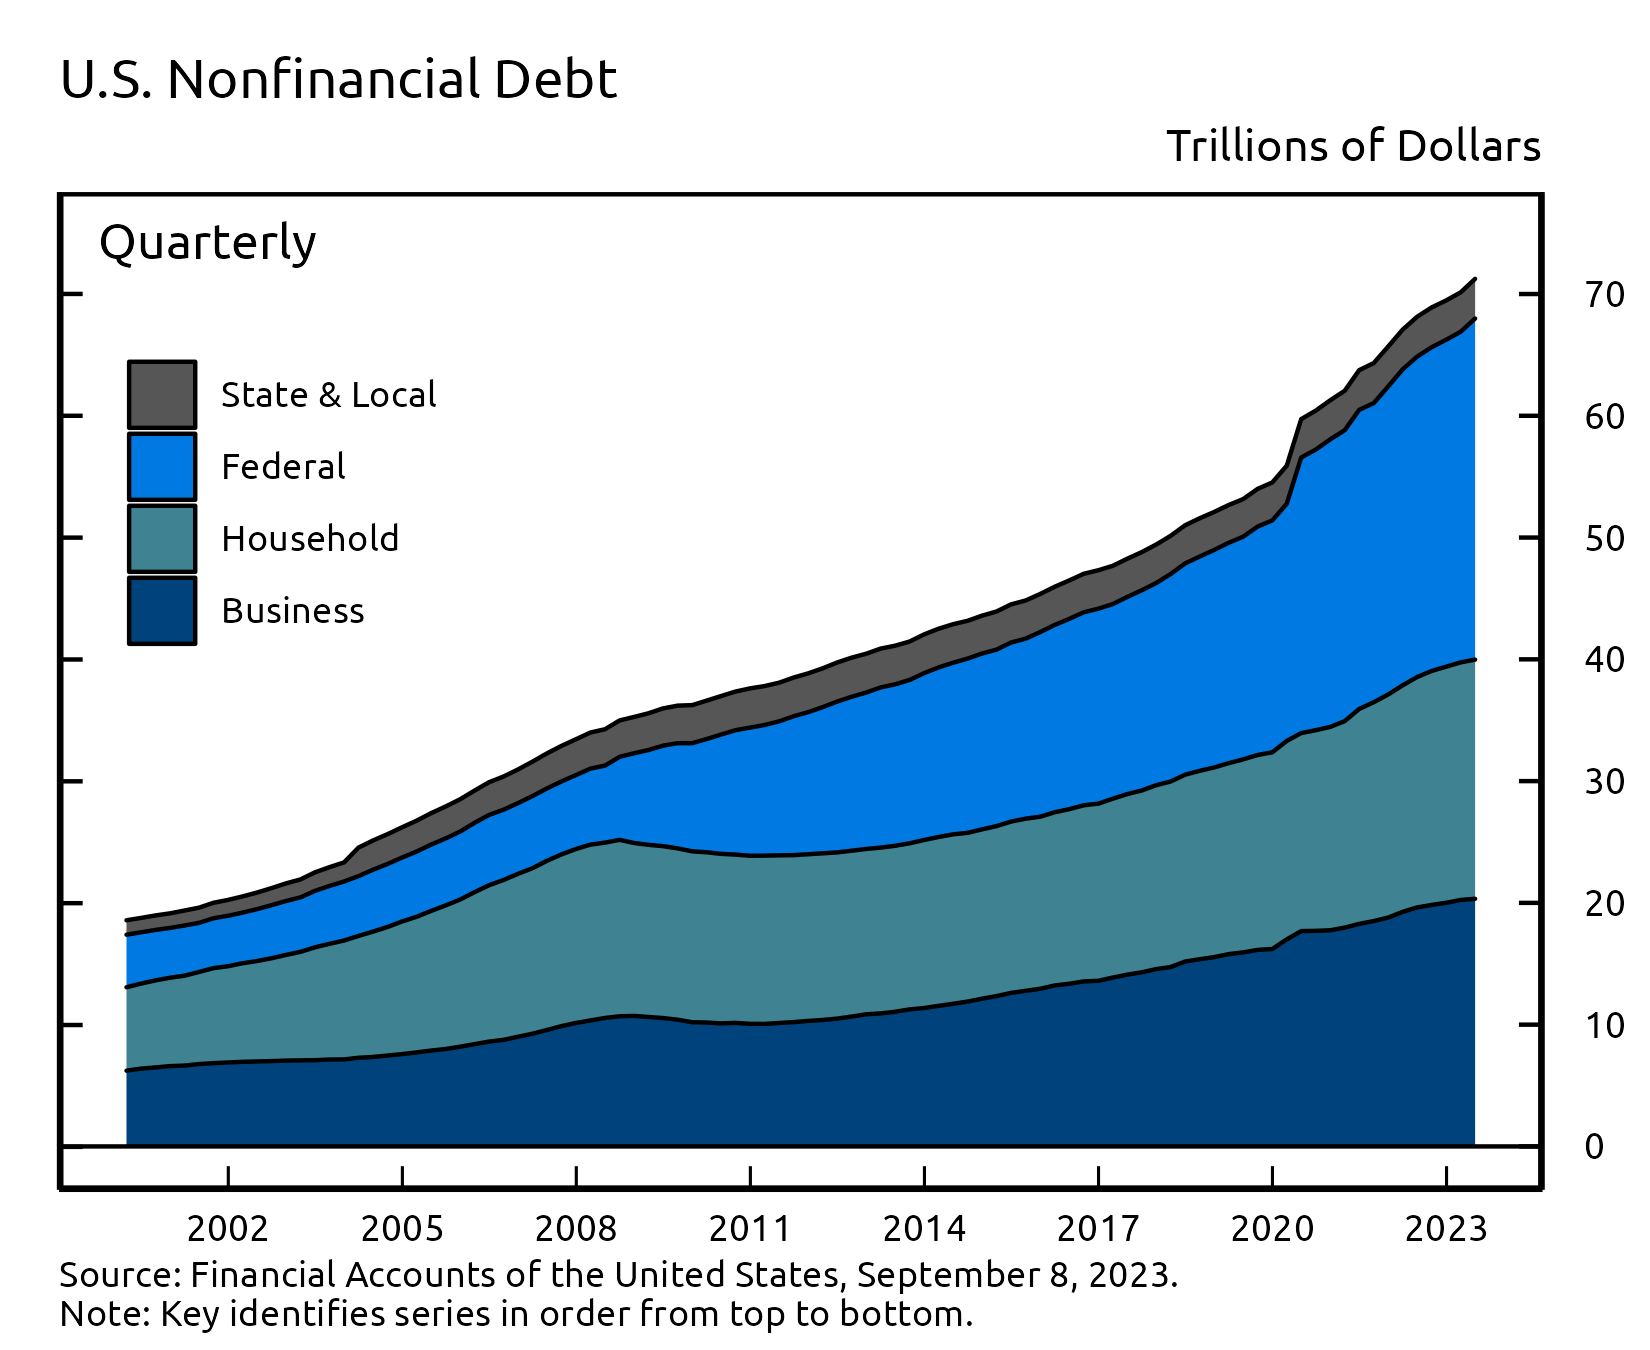 A stacked area chart showing total debt of US nonfinancial sectors over time, with separate areas for component sectors. Time is plotted along the horizontal axis and dollars are plotted on the vertical axis.